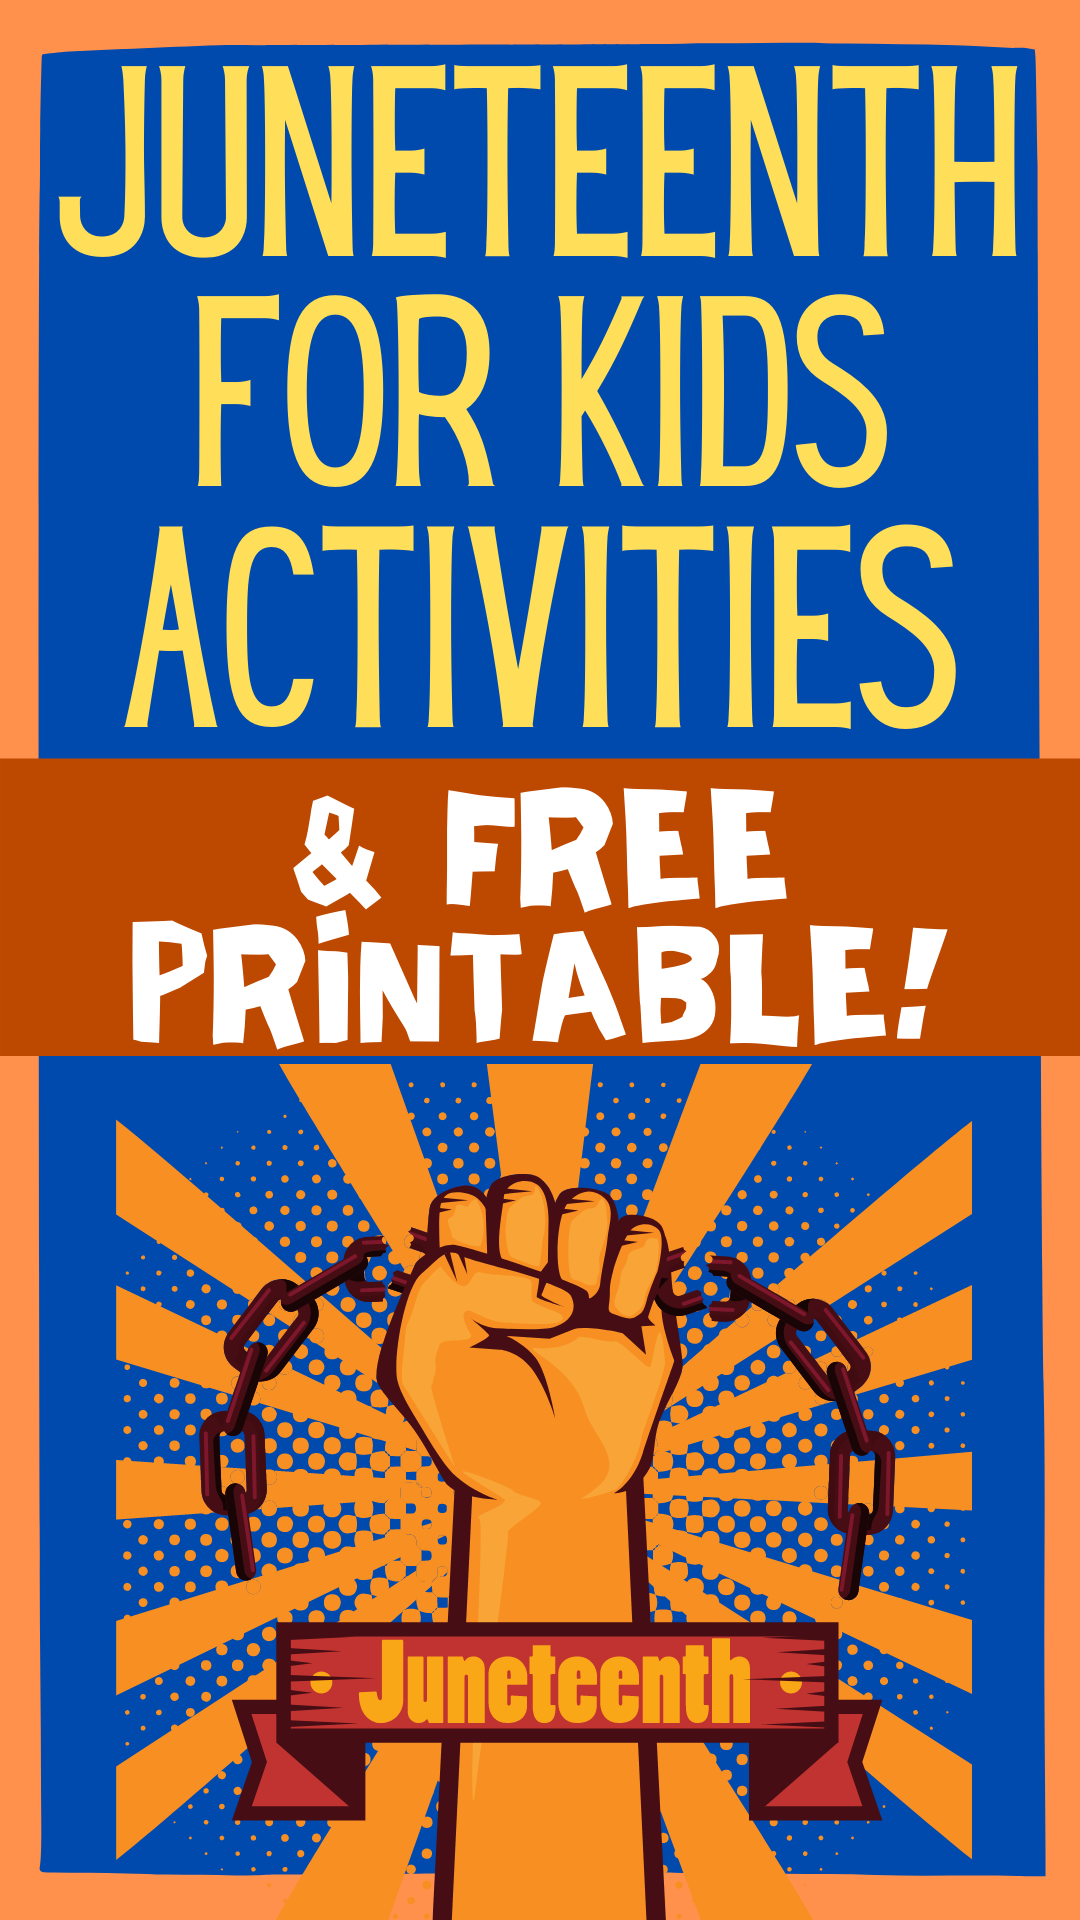 Juneteenth Celebration Ideas for kids with enslaved hand breaking free of chain